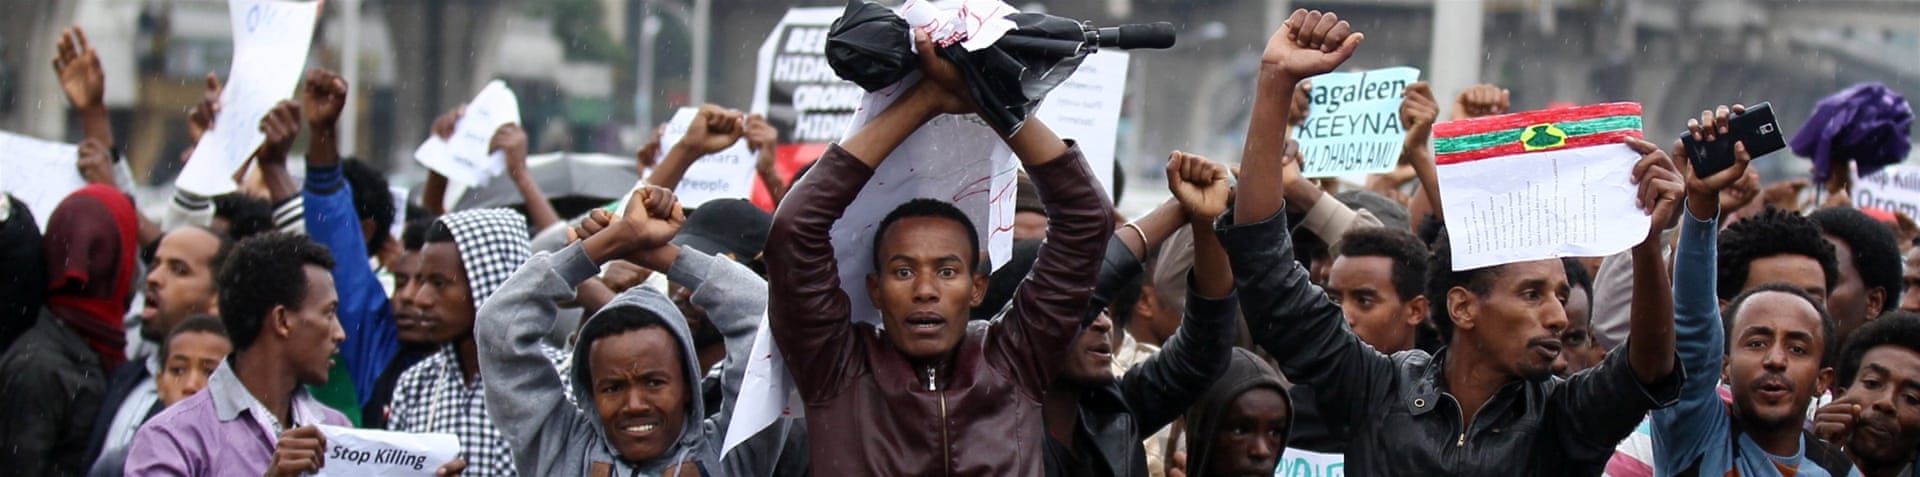 Oromo and Amhara demonstrators are calling for more rights. [EPA]